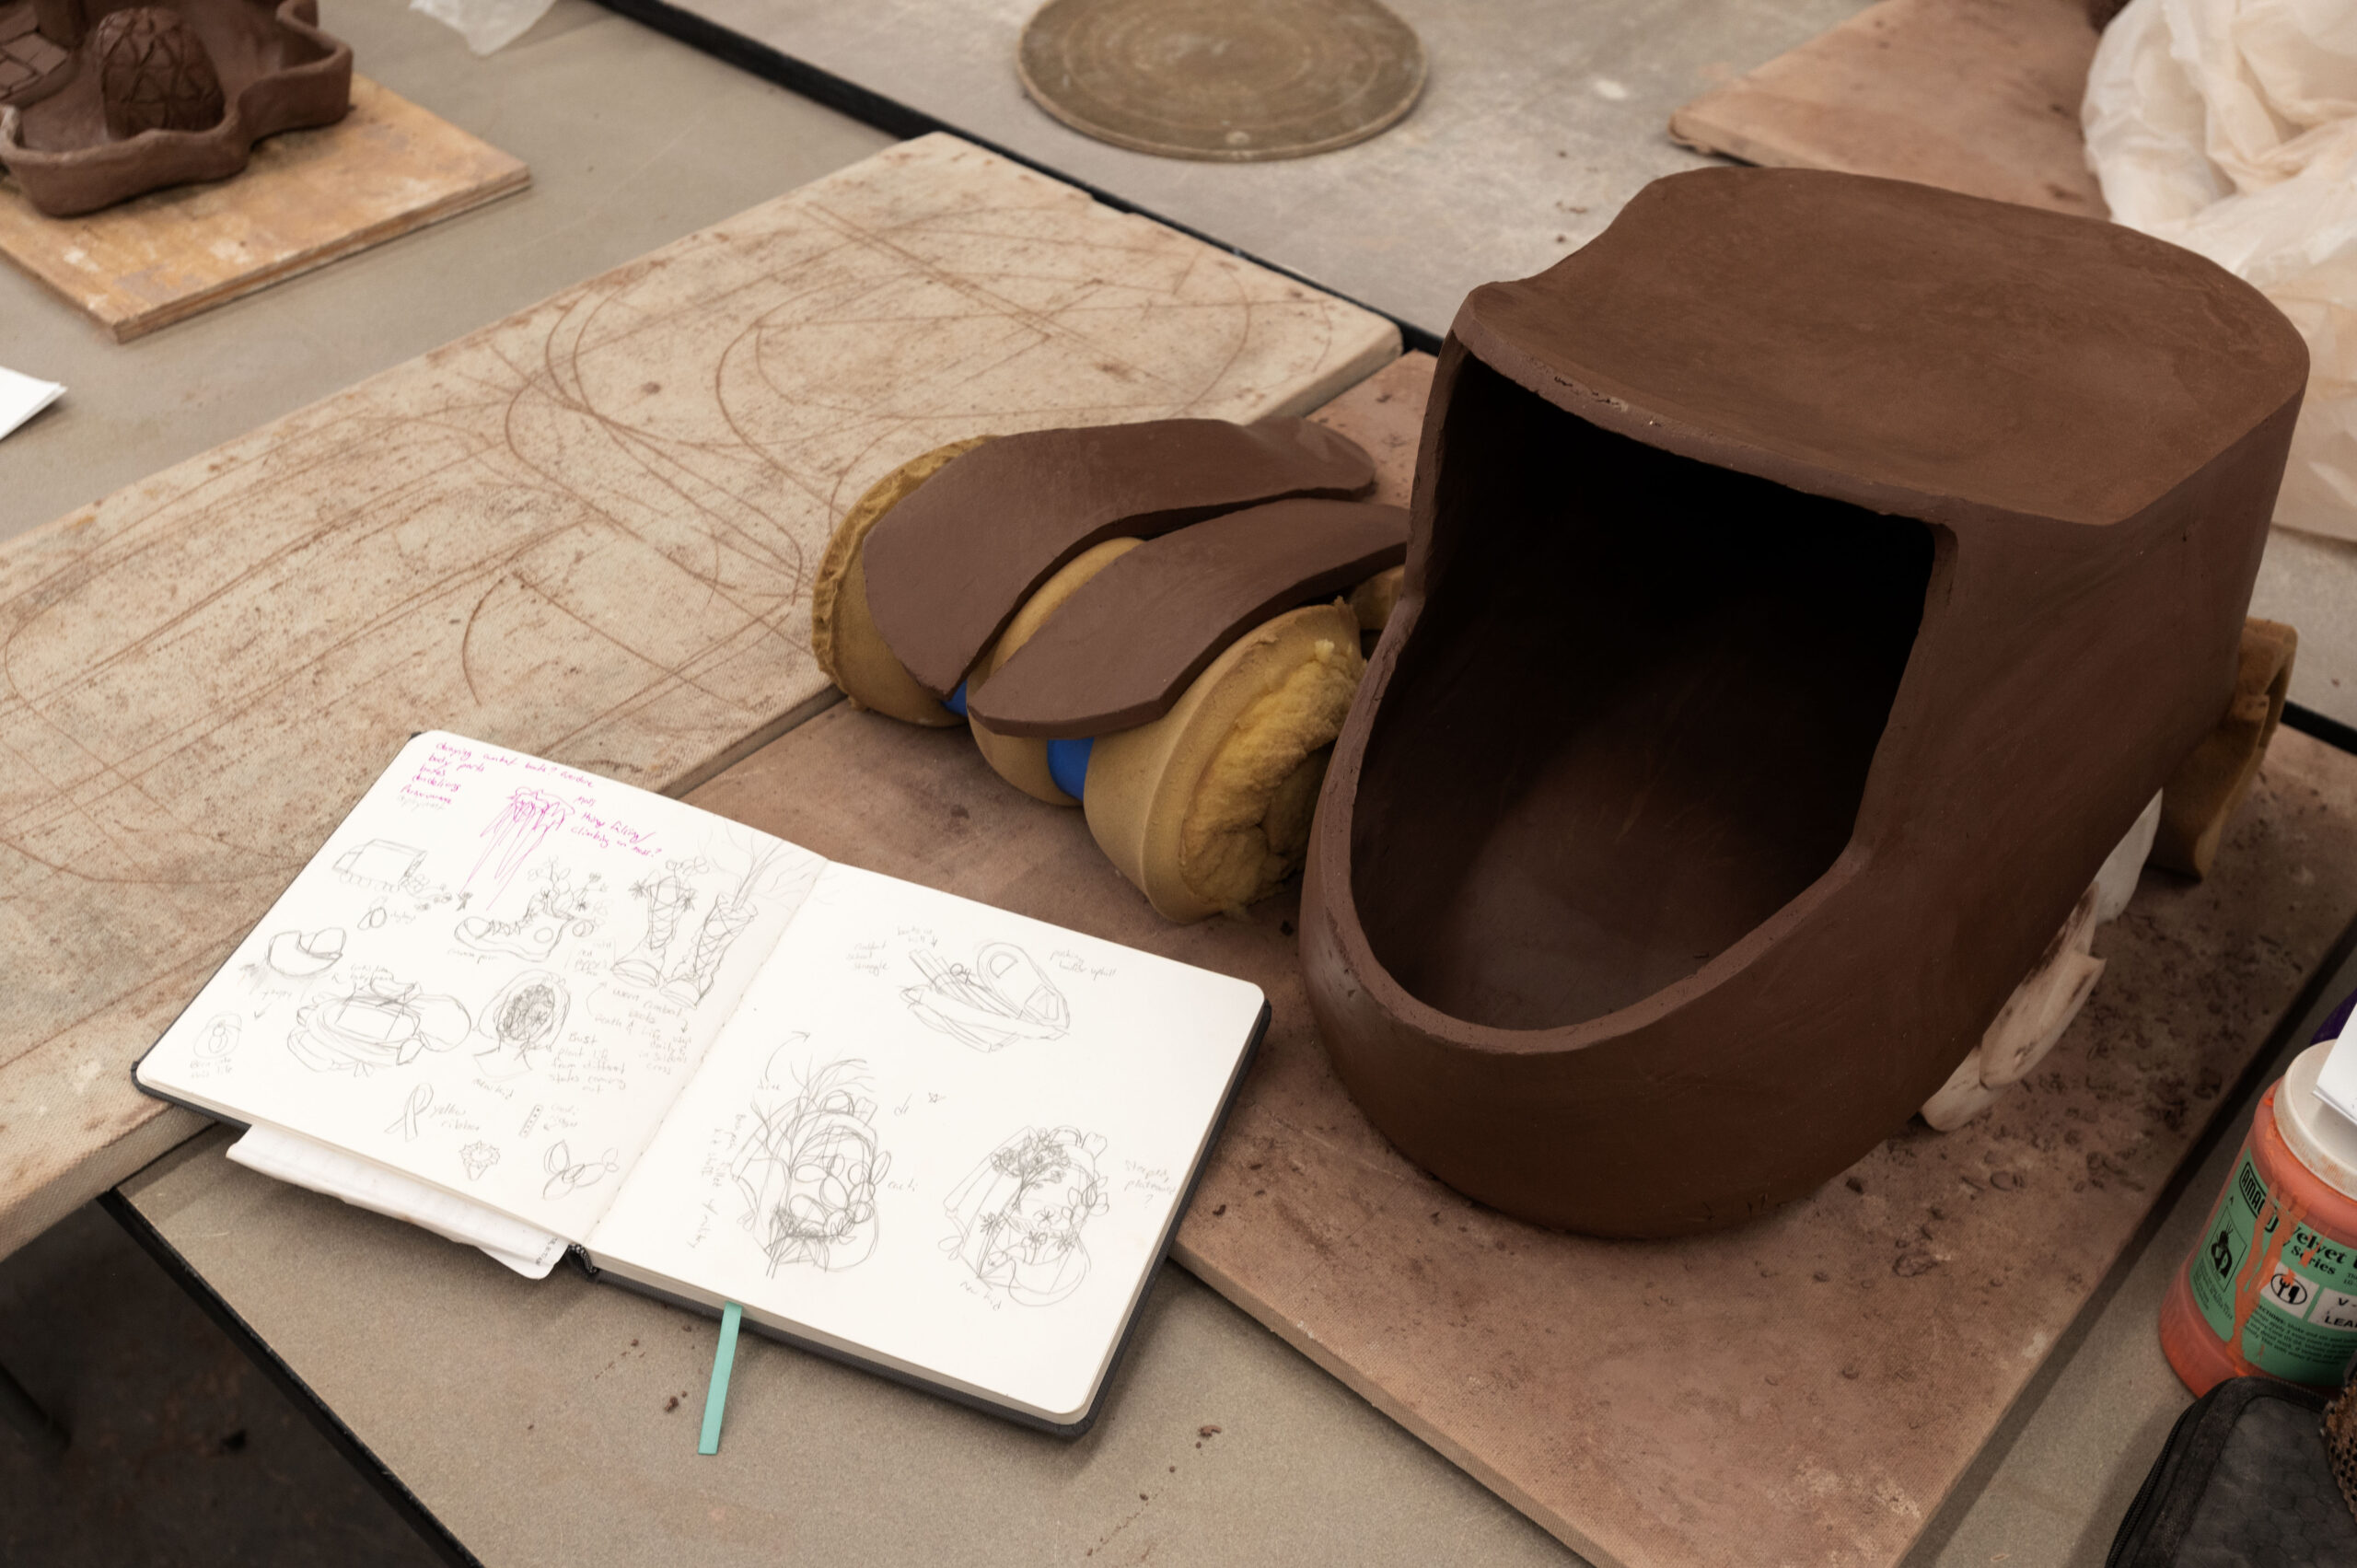 A sketchbook sits next to a half-finished ceramic scultpure of a backpack.